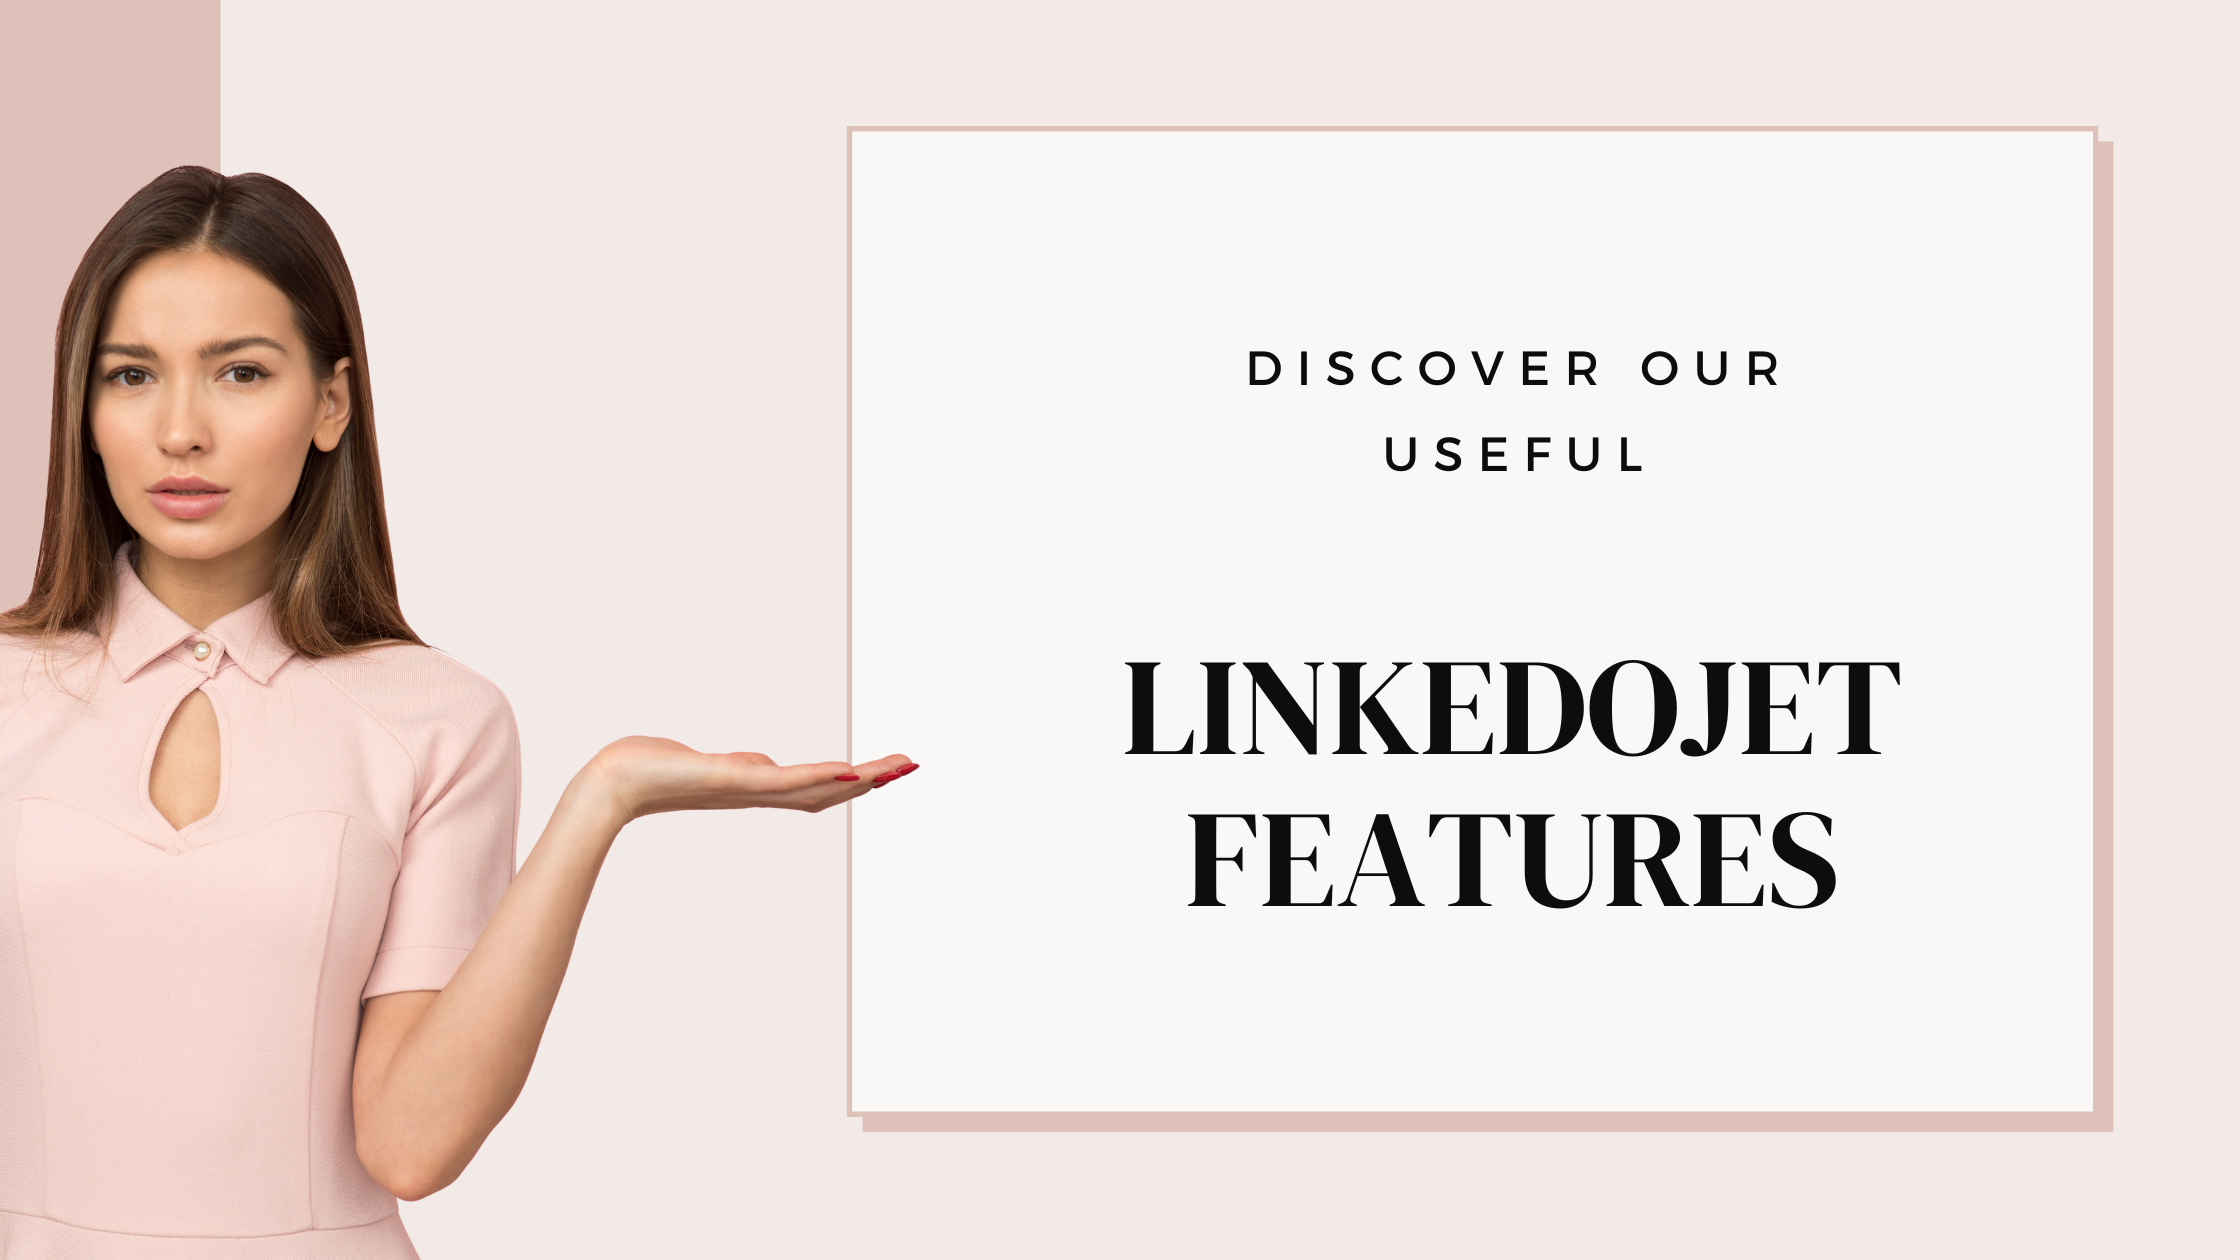 Checklist of Linkedojet Features